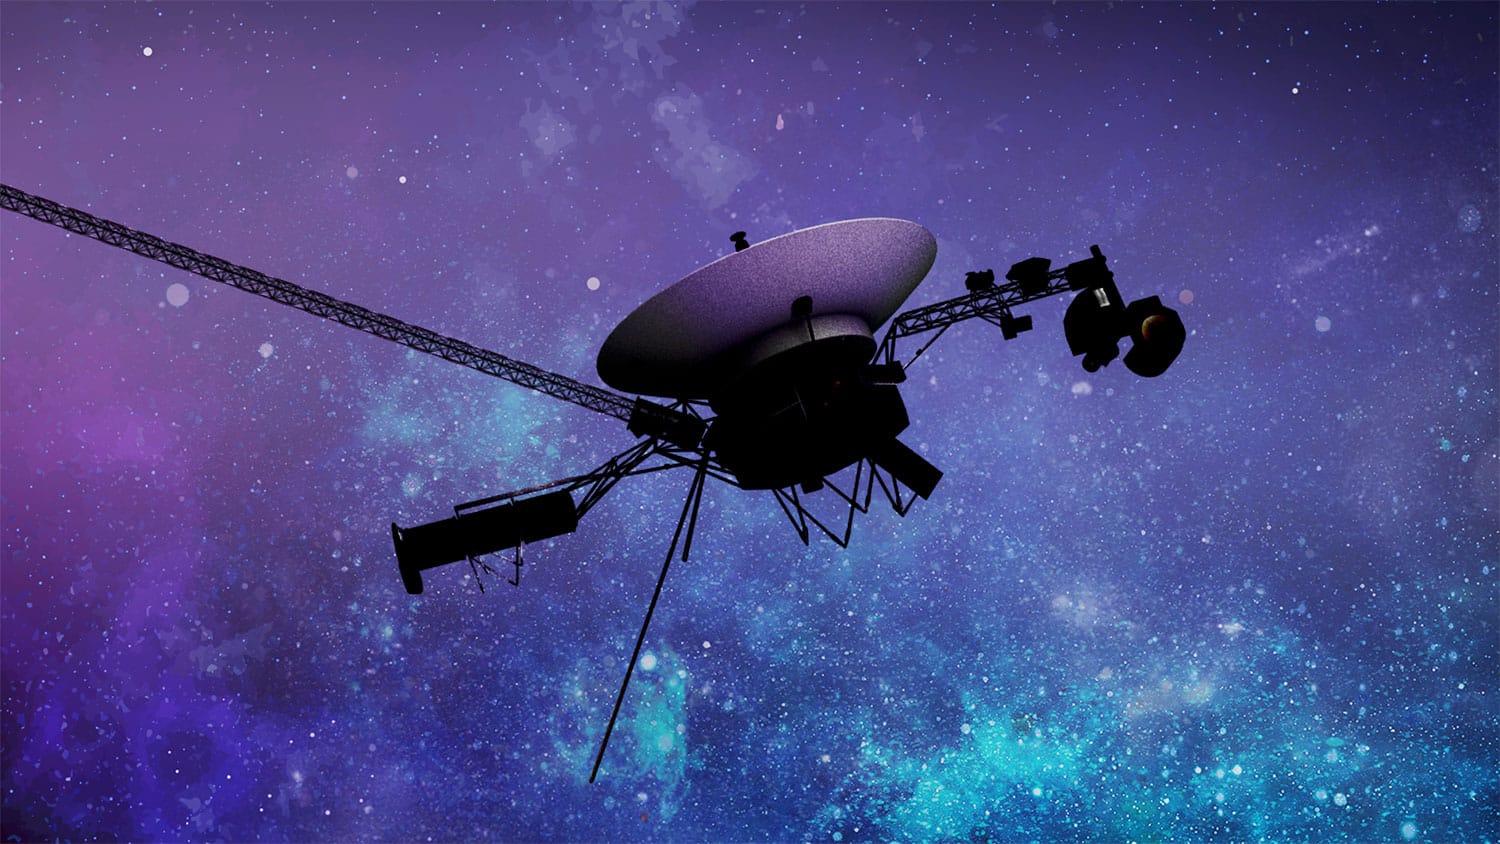 Artist’s illustration of one of the Voyager spacecraft.